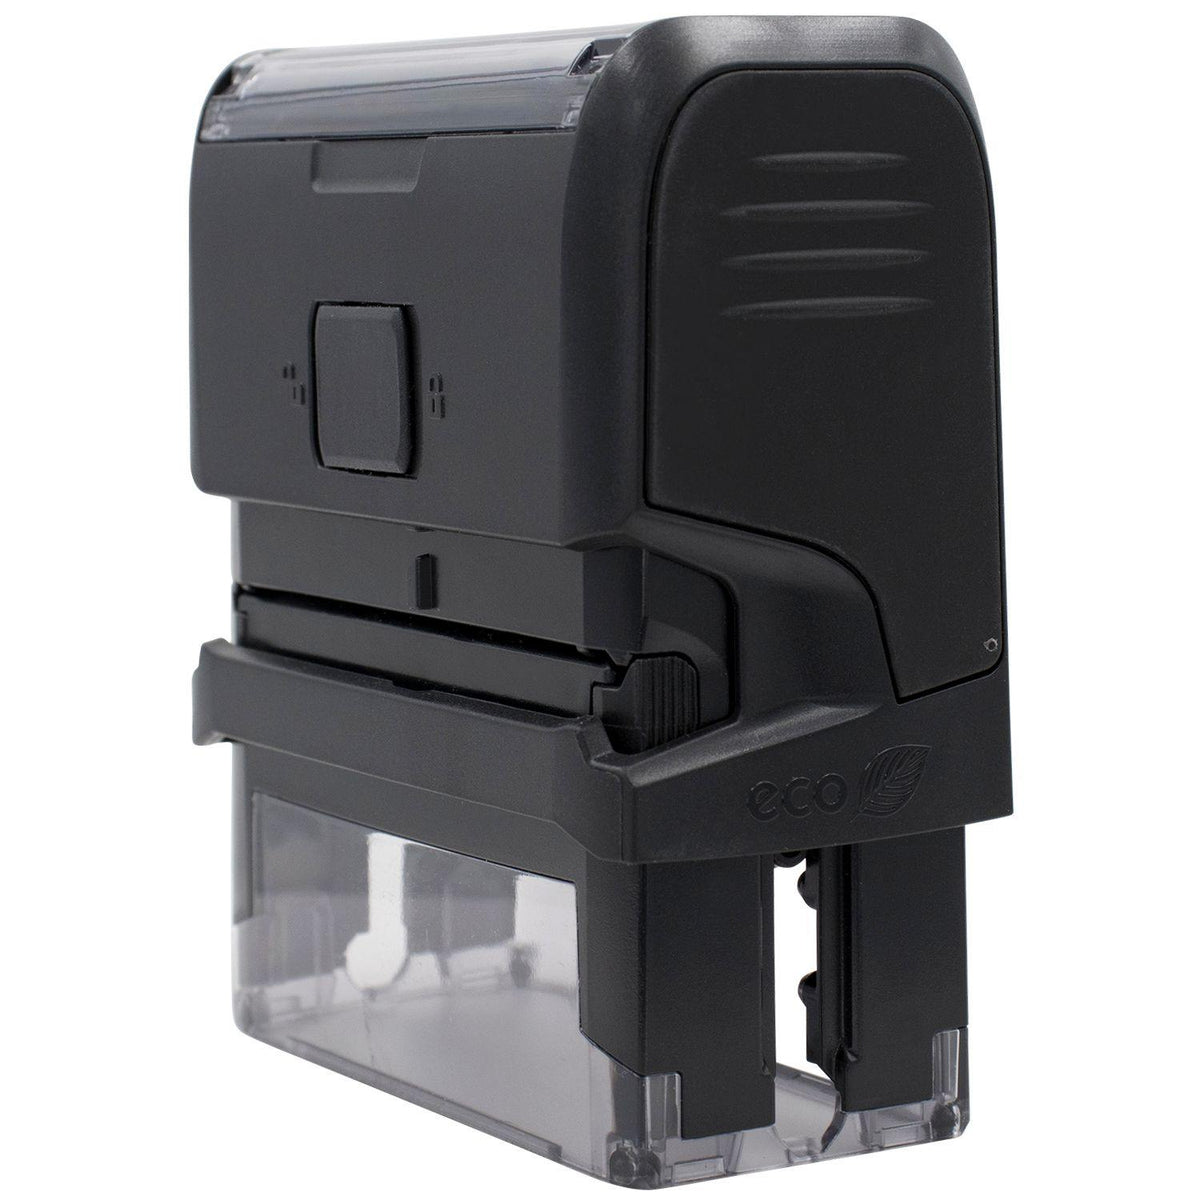 Side View of Large Self Inking Closed Account Stamp at an Angle